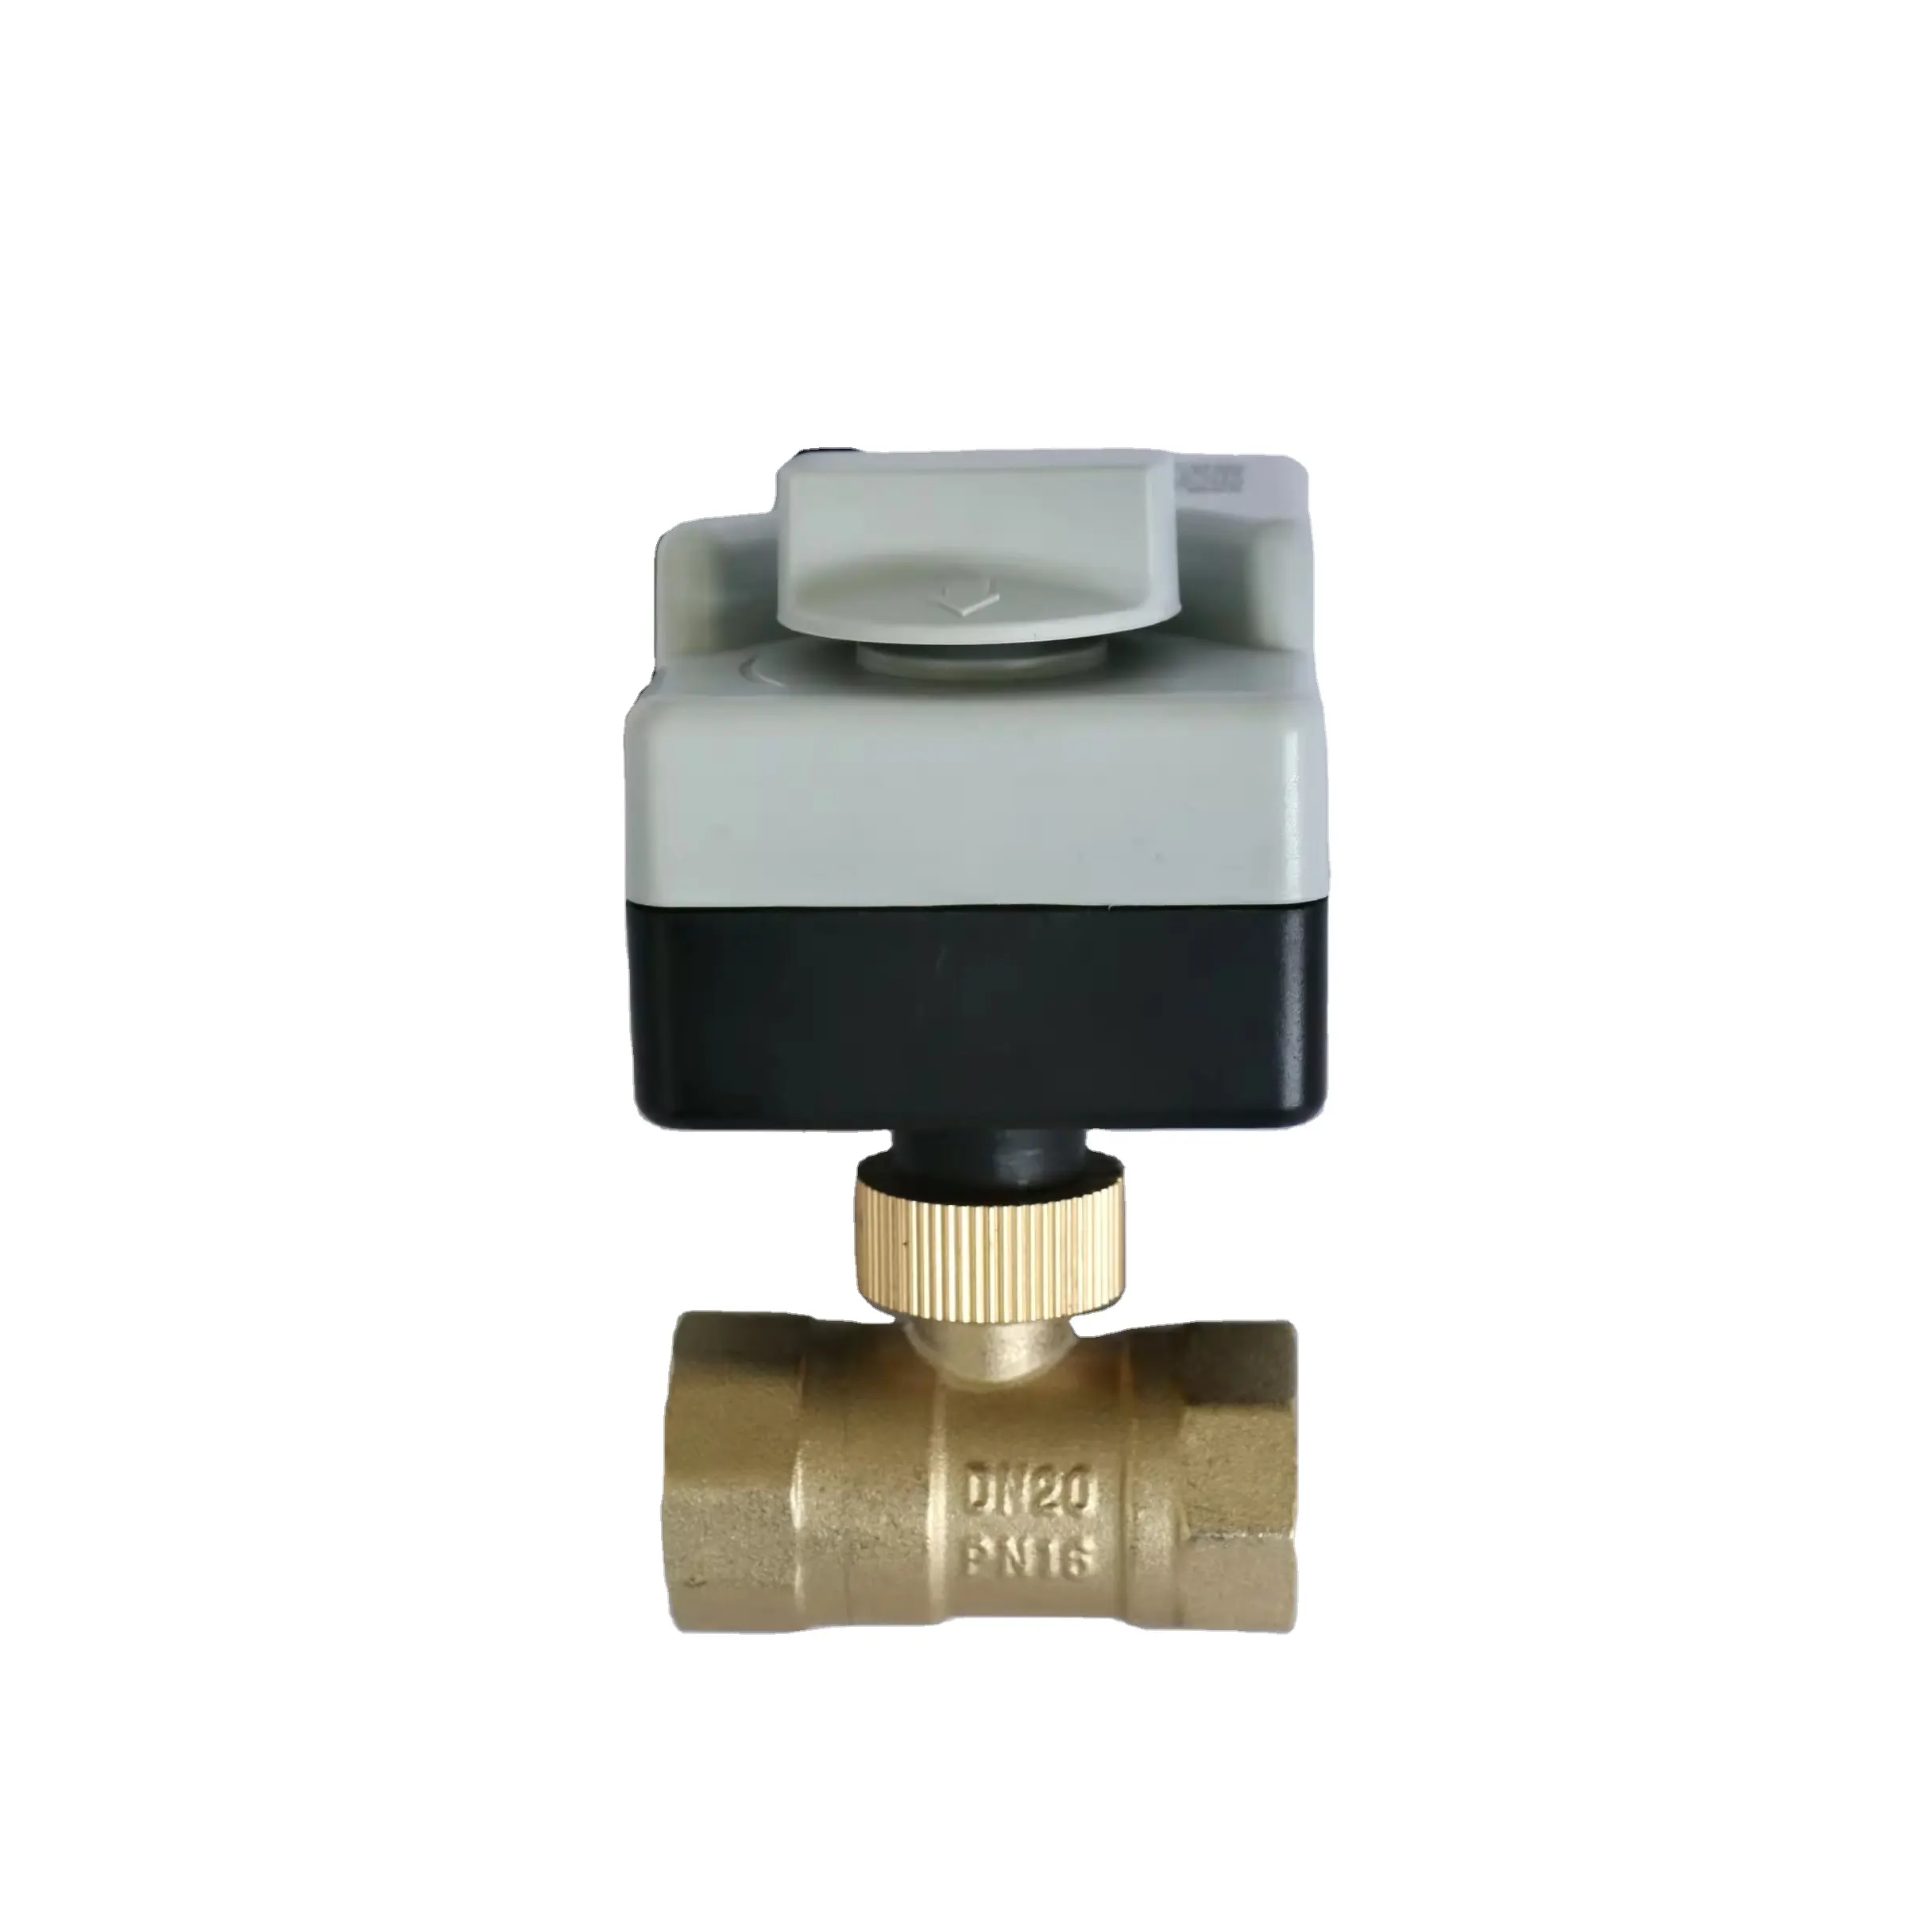 SiXi valve two way Hand operated integrated ball valve 601 for central air conditioning systems or water flow control